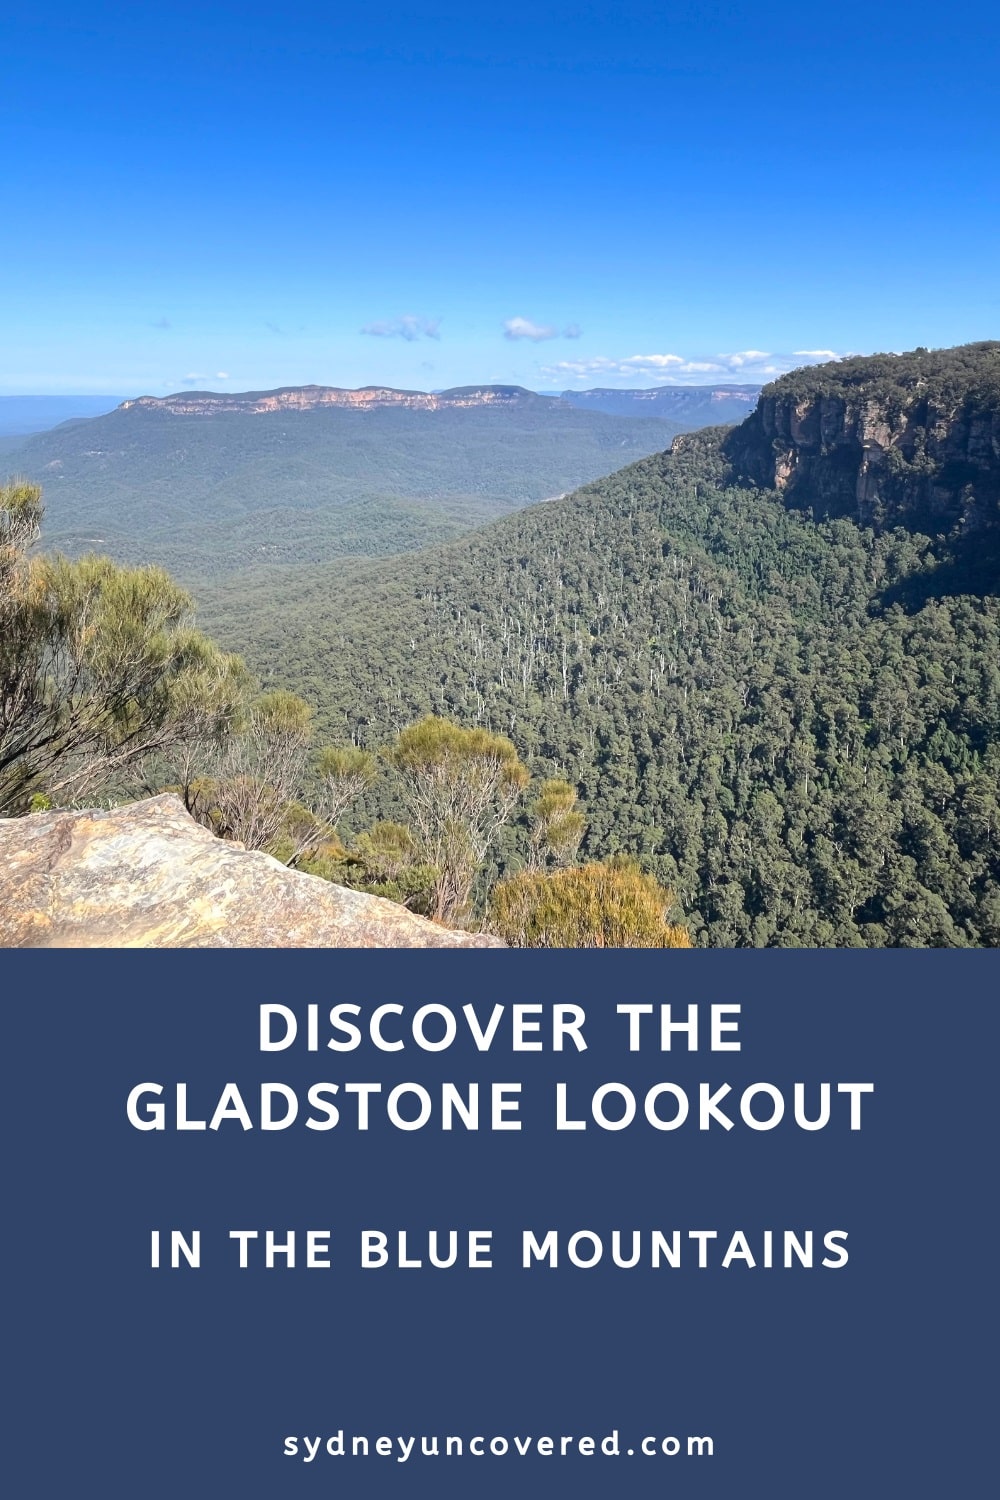 Discover the Gladstone Lookout in the Blue Mountains